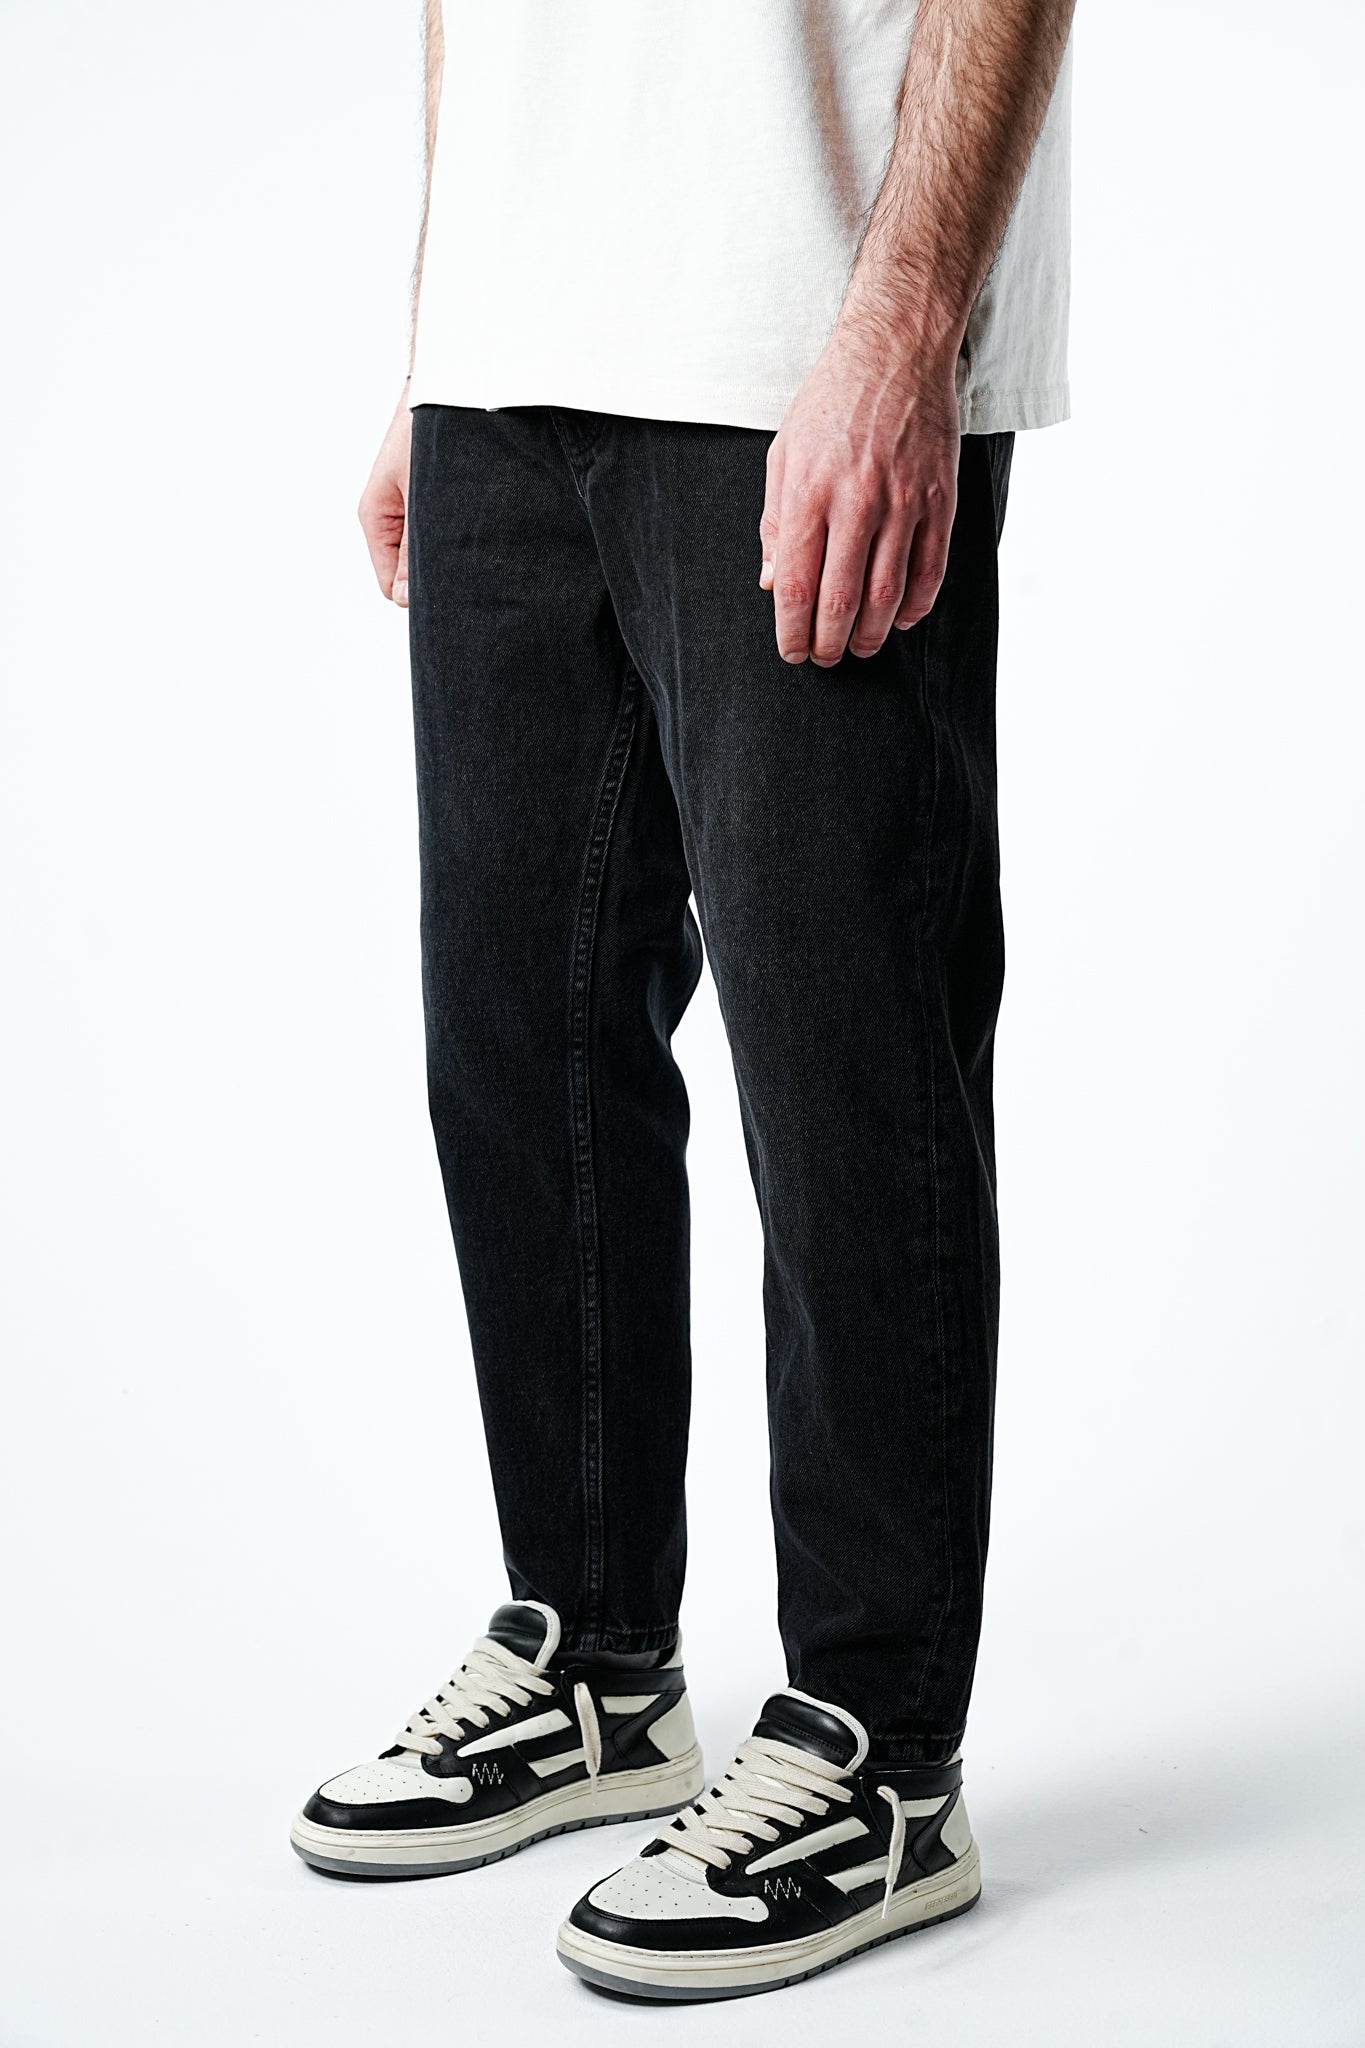 Premium Black Faded Relaxed Fit Jeans - UNEFFECTED STUDIOS® - JEANS - 2Y PREMIUM